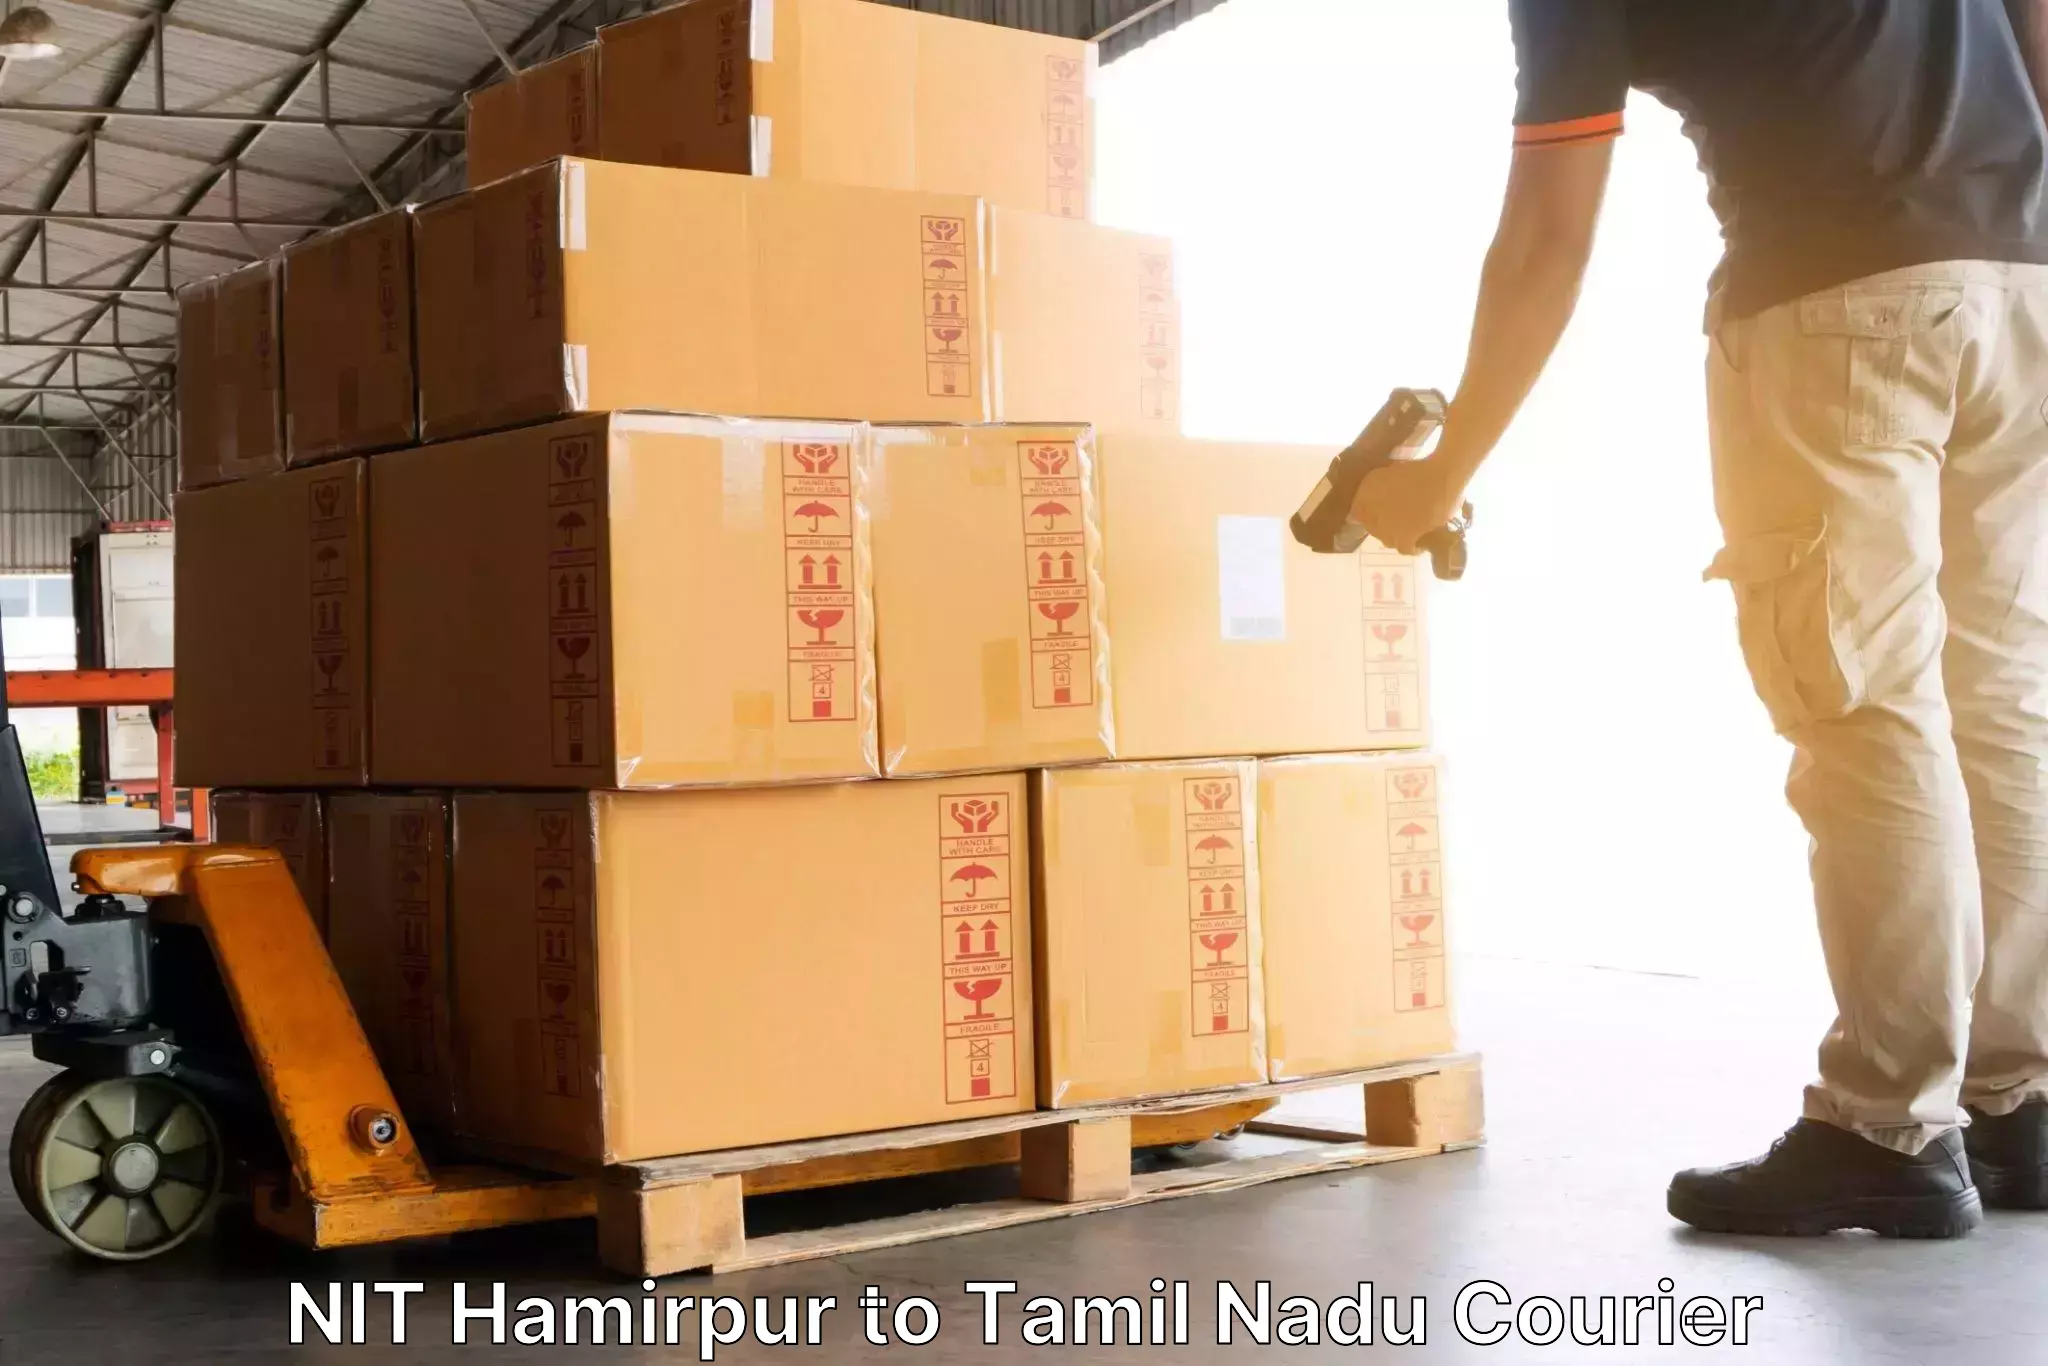 Courier tracking online NIT Hamirpur to Chennai Port